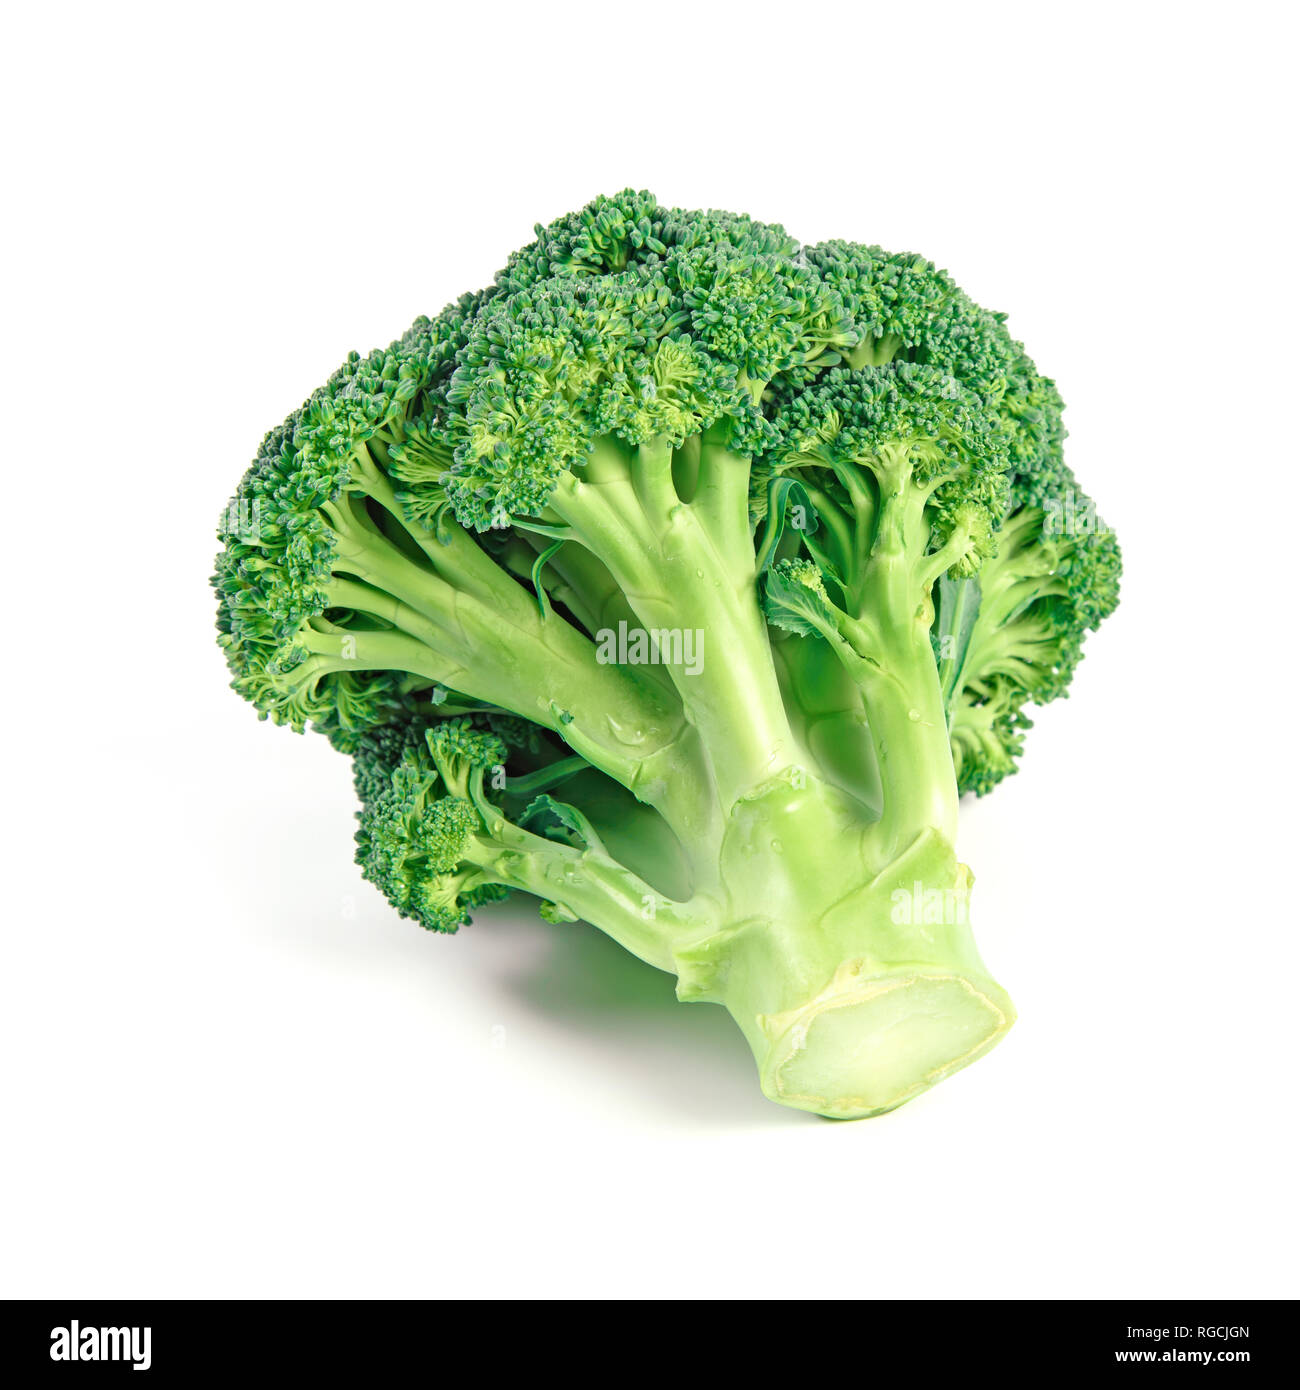 Raw Fresh Broccoli as Healphy Food Isolated on White Background Stock Photo